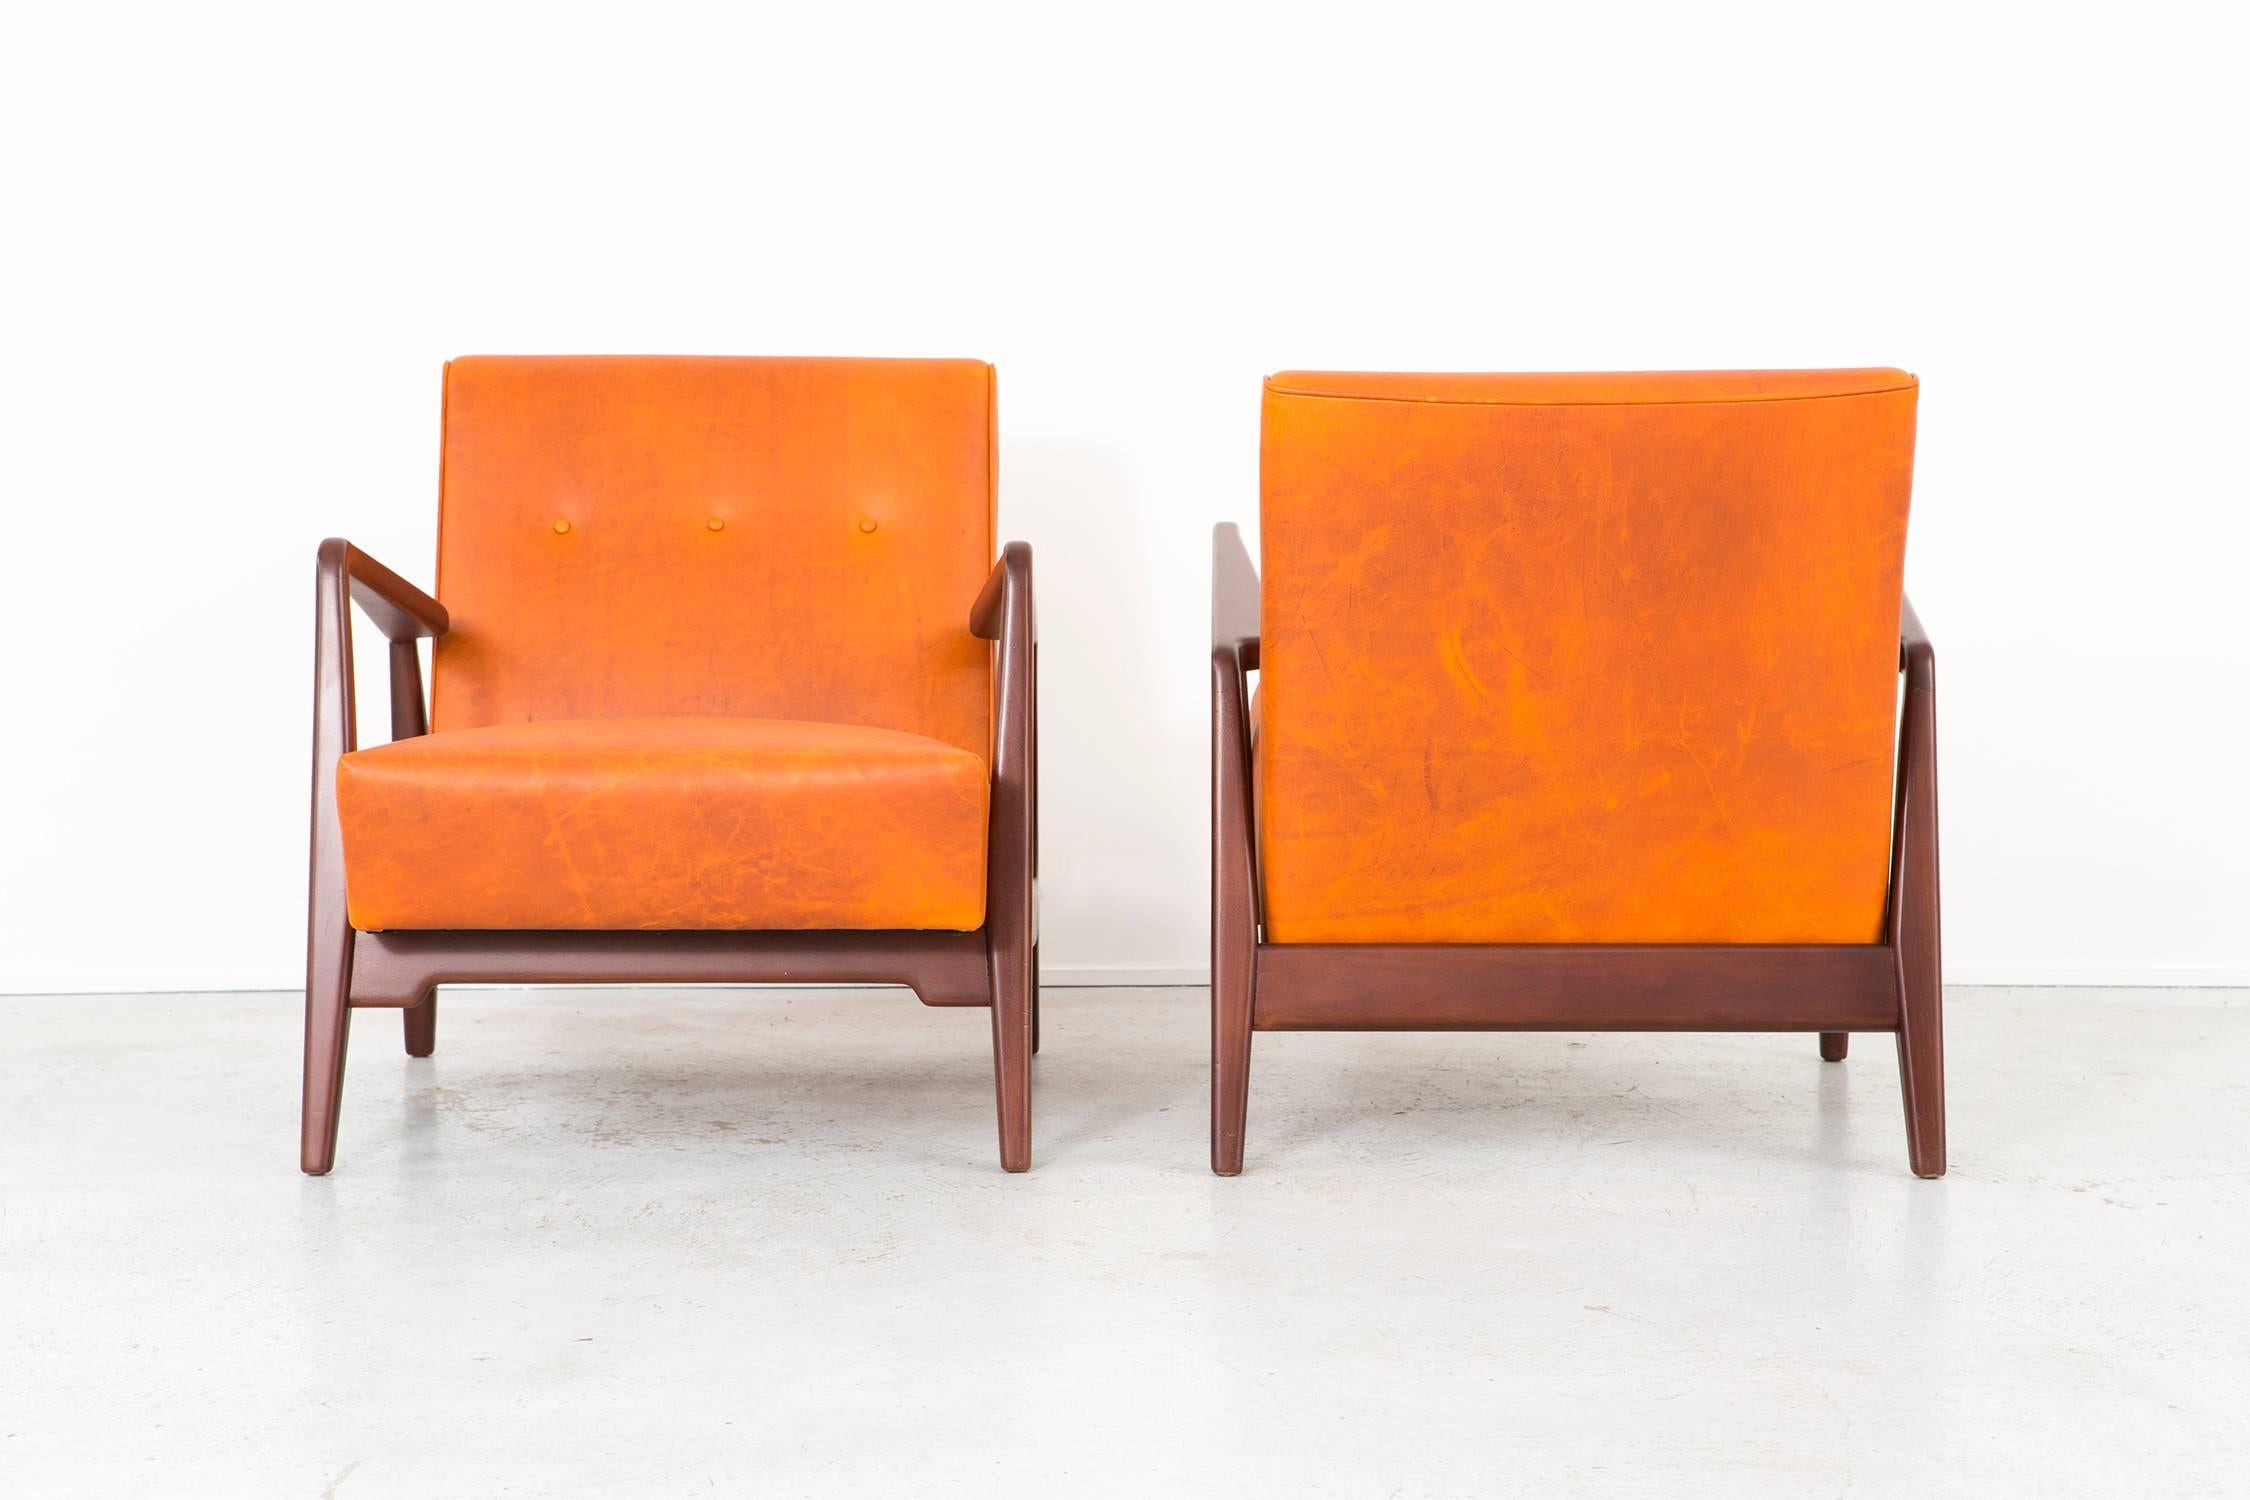 American Set of Mid-Century Modern Jens Risom Lounge Chairs Newly Reupholstered